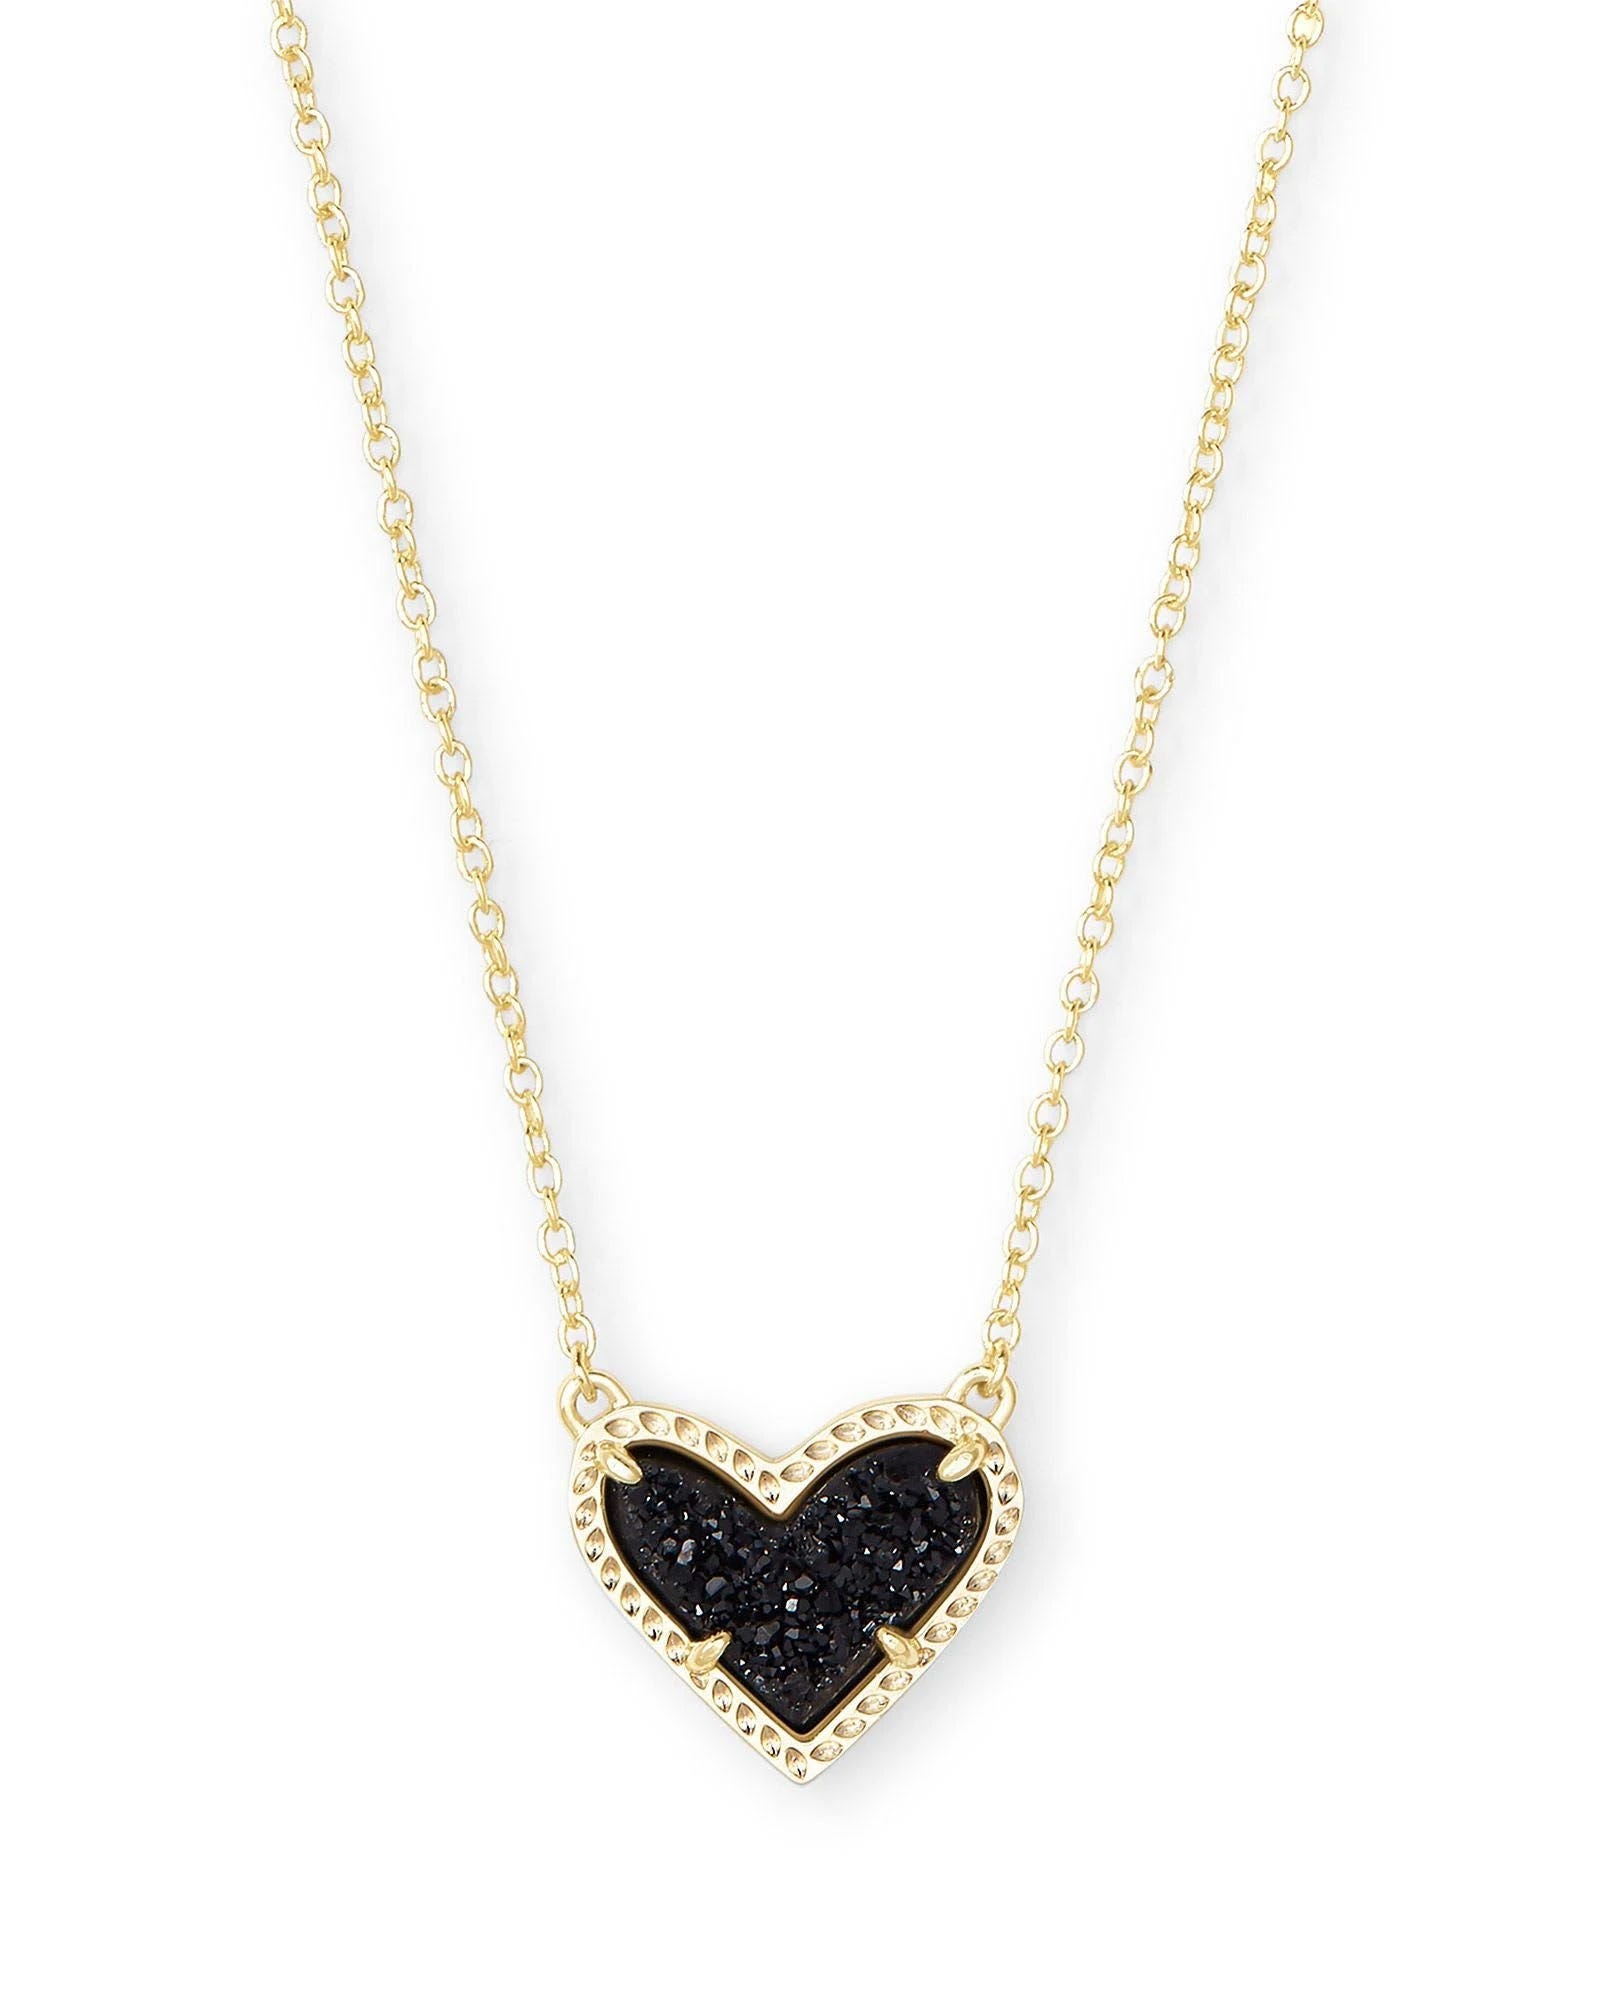 Stylish 14k Gold Plated Over Brass Pendant Necklace with Black Drusy | Image